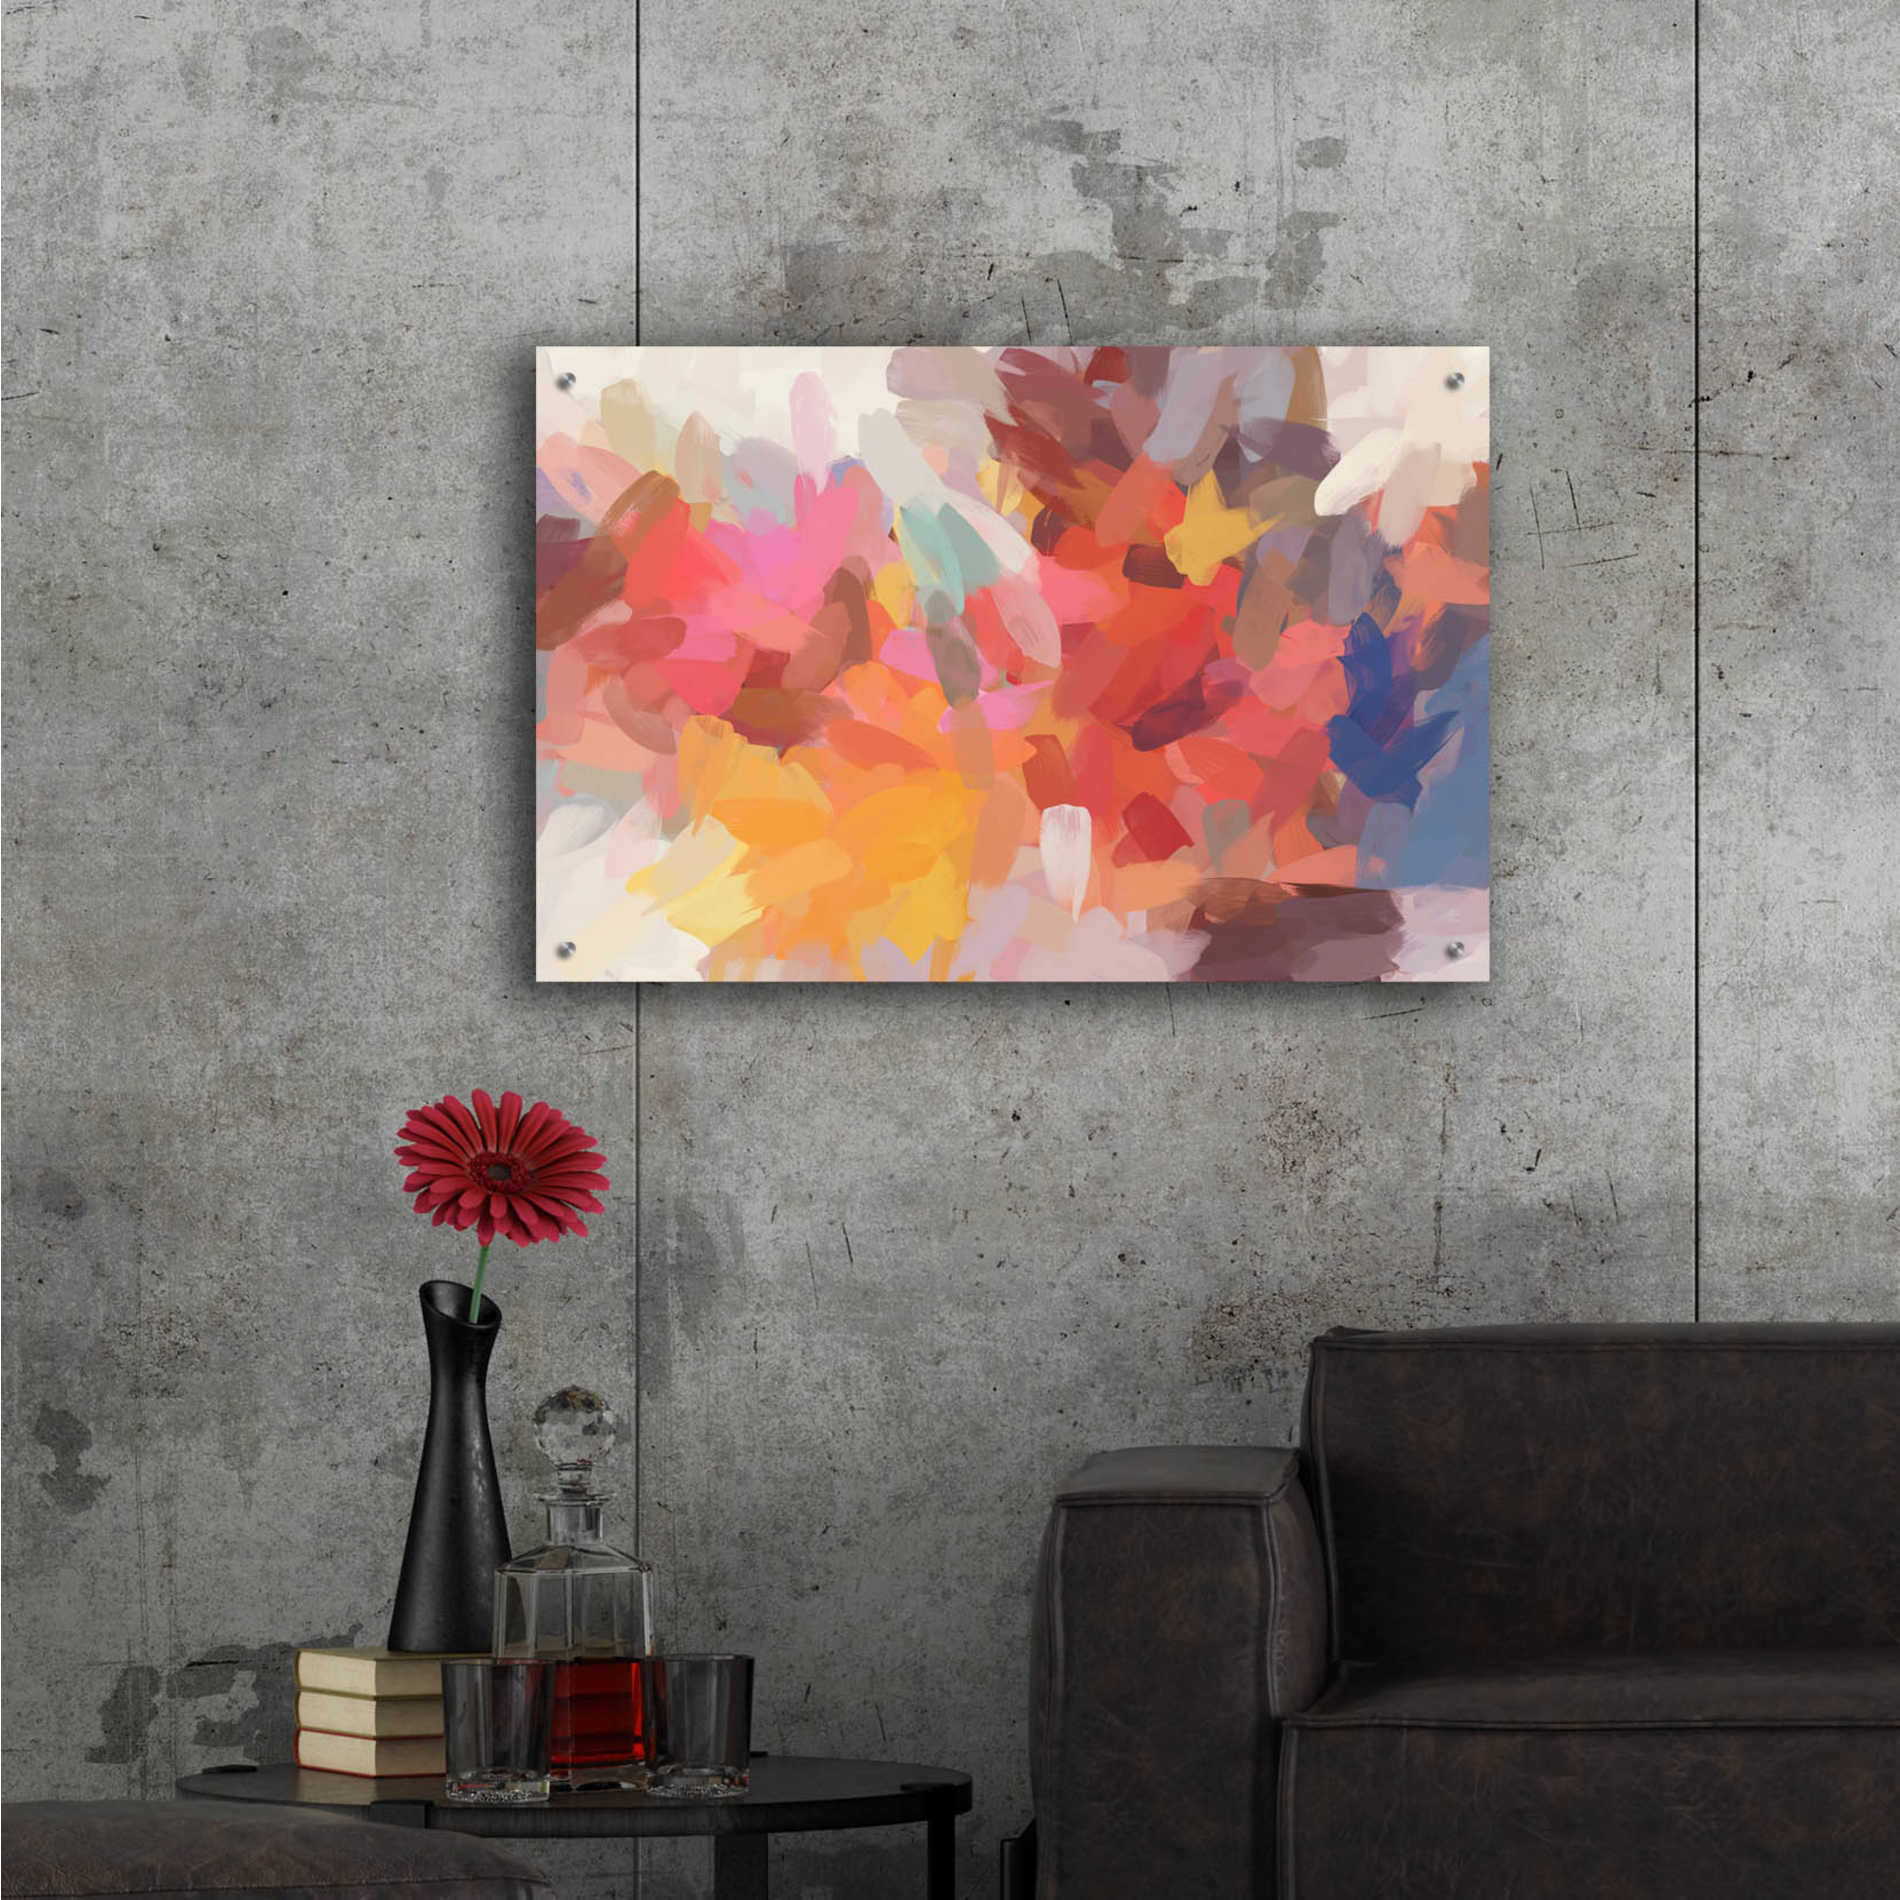 Epic Art 'Abstract Colorful Flows 7' by Irena Orlov Acrylic Glass Wall Art,36x24